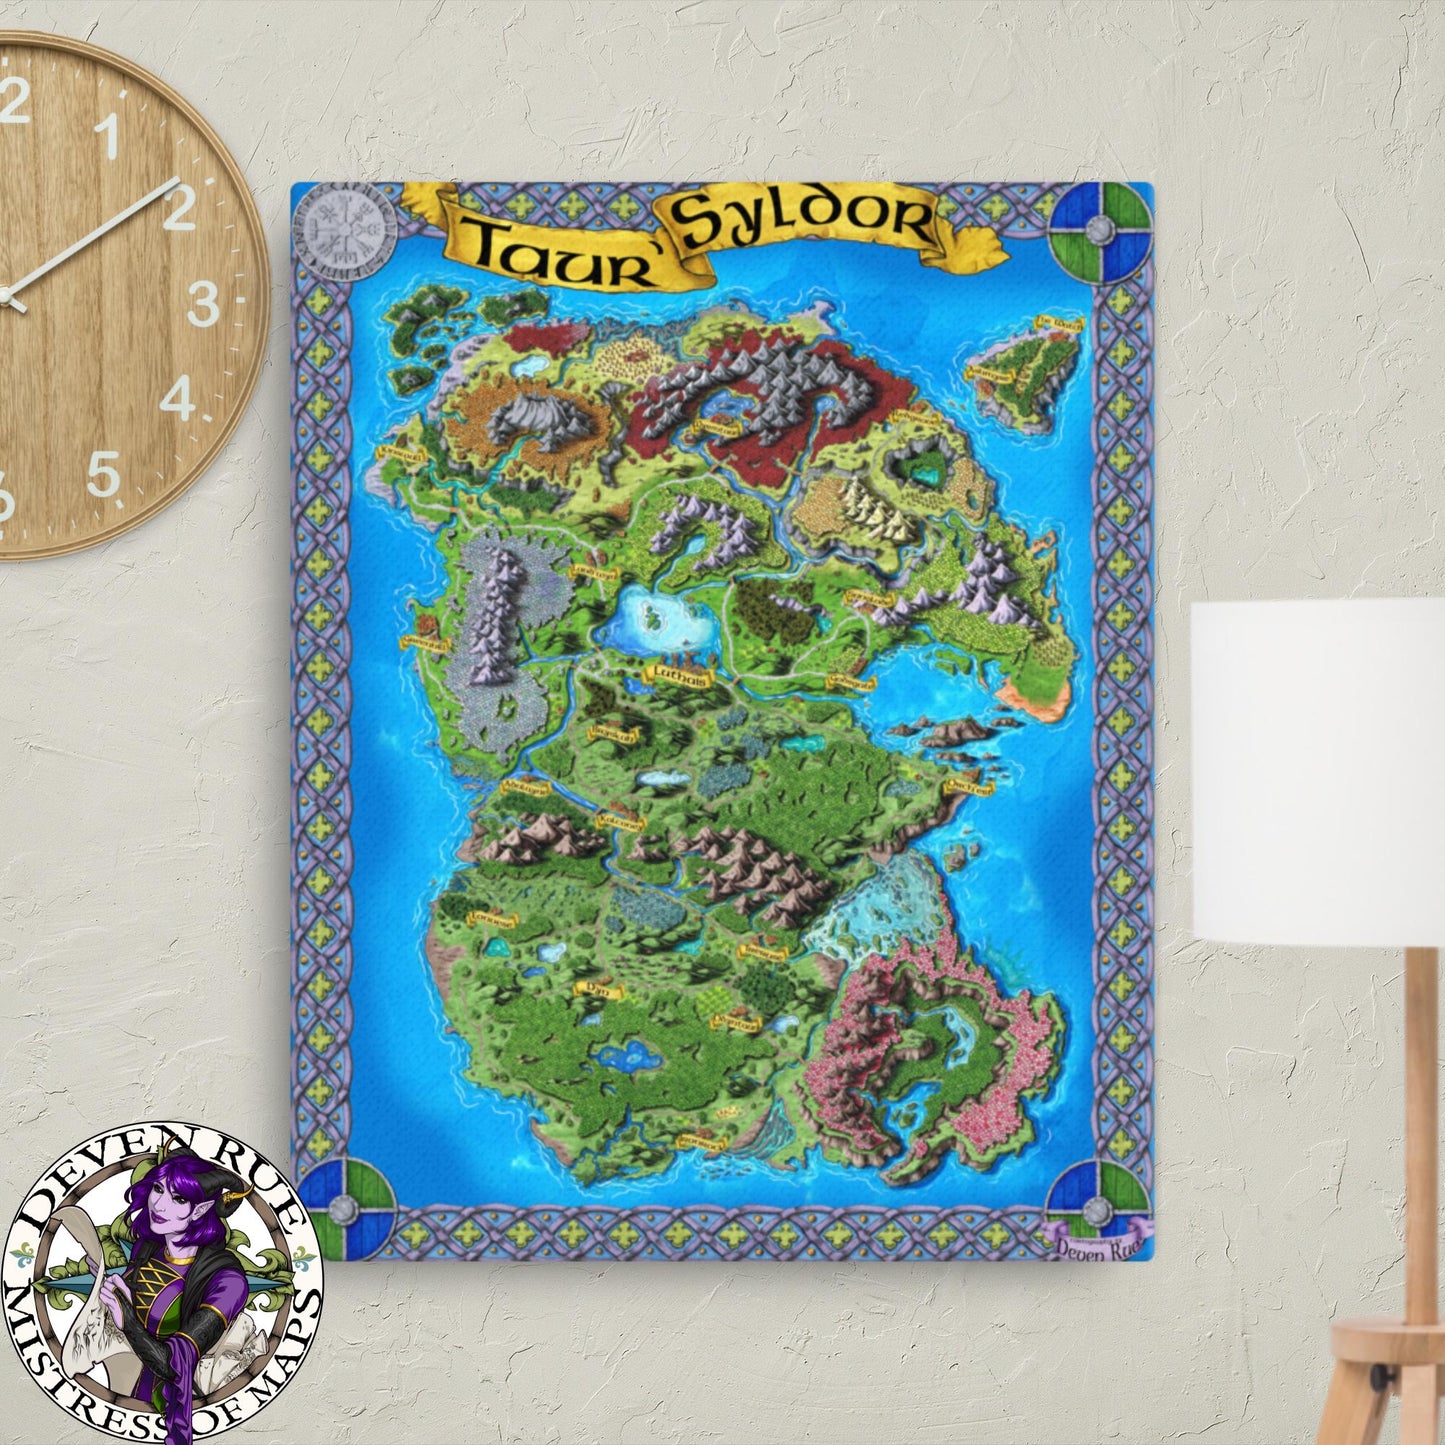 A 16" by 20" canvas print of the color Taur'Syldor map by Deven Rue.